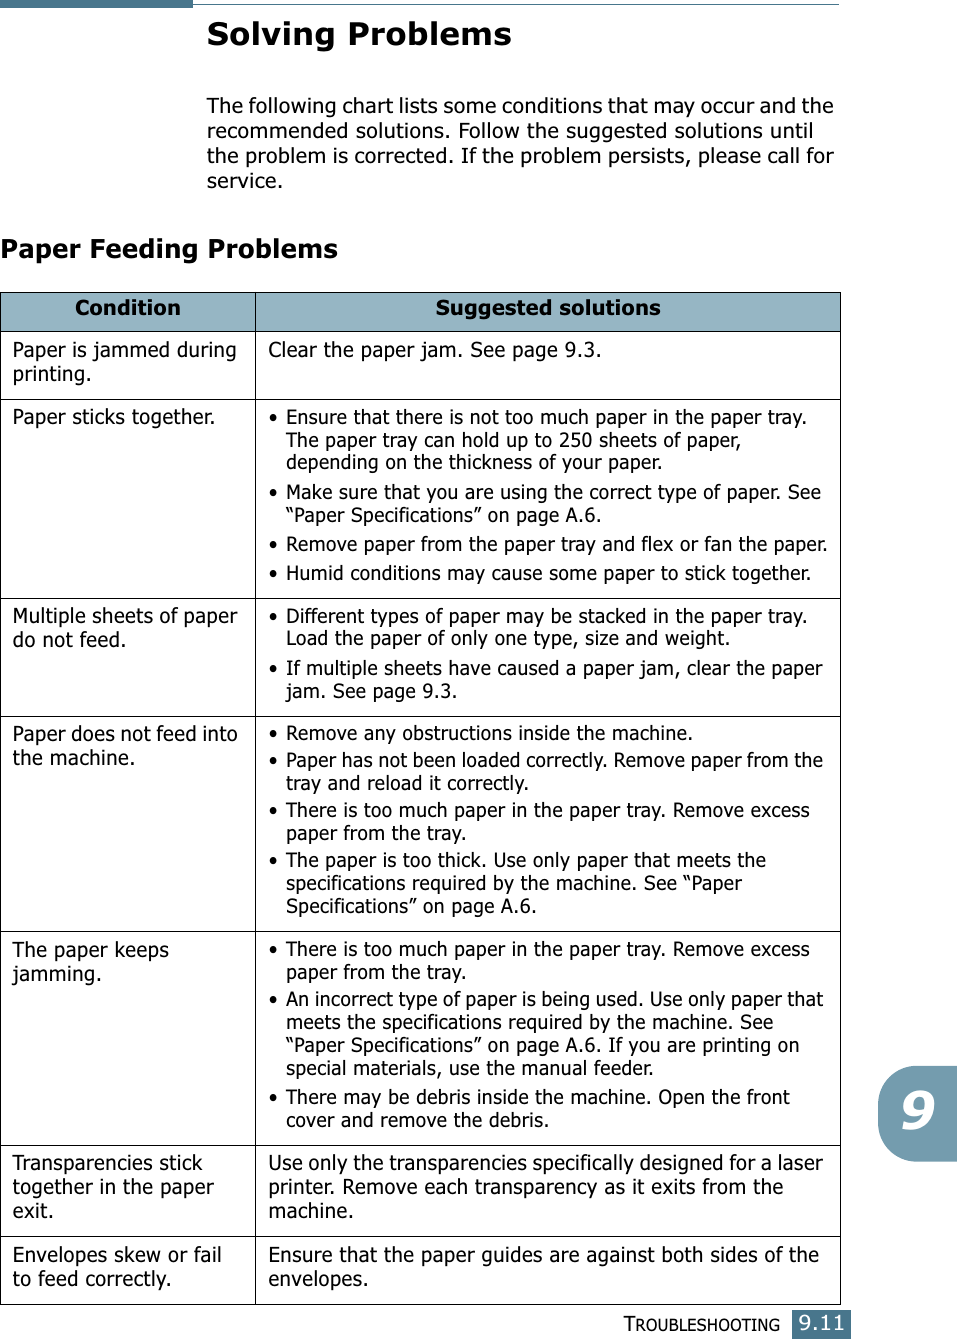 TROUBLESHOOTING9.119Solving ProblemsThe following chart lists some conditions that may occur and the recommended solutions. Follow the suggested solutions until the problem is corrected. If the problem persists, please call for service.Paper Feeding ProblemsCondition Suggested solutionsPaper is jammed during printing.Clear the paper jam. See page 9.3.Paper sticks together.• Ensure that there is not too much paper in the paper tray. The paper tray can hold up to 250 sheets of paper, depending on the thickness of your paper.• Make sure that you are using the correct type of paper. See “Paper Specifications” on page A.6.• Remove paper from the paper tray and flex or fan the paper.• Humid conditions may cause some paper to stick together.Multiple sheets of paper do not feed.• Different types of paper may be stacked in the paper tray. Load the paper of only one type, size and weight.• If multiple sheets have caused a paper jam, clear the paper jam. See page 9.3.Paper does not feed into the machine.• Remove any obstructions inside the machine.• Paper has not been loaded correctly. Remove paper from the tray and reload it correctly.• There is too much paper in the paper tray. Remove excess paper from the tray.• The paper is too thick. Use only paper that meets the specifications required by the machine. See “Paper Specifications” on page A.6.The paper keeps jamming.• There is too much paper in the paper tray. Remove excess paper from the tray.• An incorrect type of paper is being used. Use only paper that meets the specifications required by the machine. See “Paper Specifications” on page A.6. If you are printing on special materials, use the manual feeder.• There may be debris inside the machine. Open the front cover and remove the debris.Transparencies stick together in the paper exit.Use only the transparencies specifically designed for a laser printer. Remove each transparency as it exits from the machine.Envelopes skew or fail to feed correctly.Ensure that the paper guides are against both sides of the envelopes.